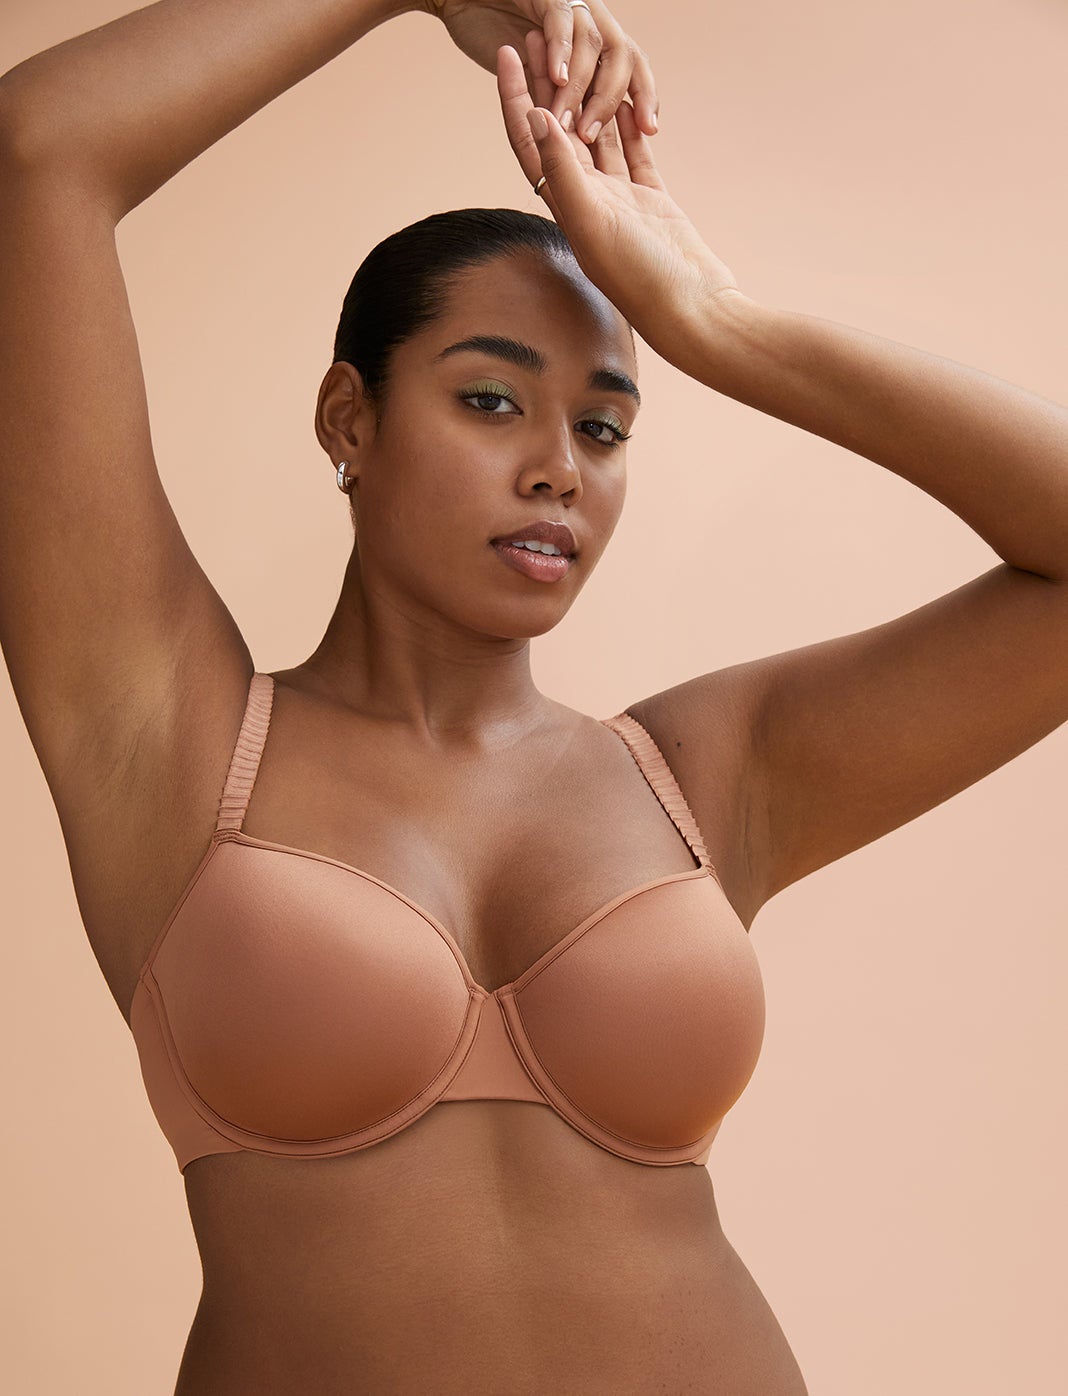 The 22 Best Bras For Side Spillage Reviews & Guide for 2022